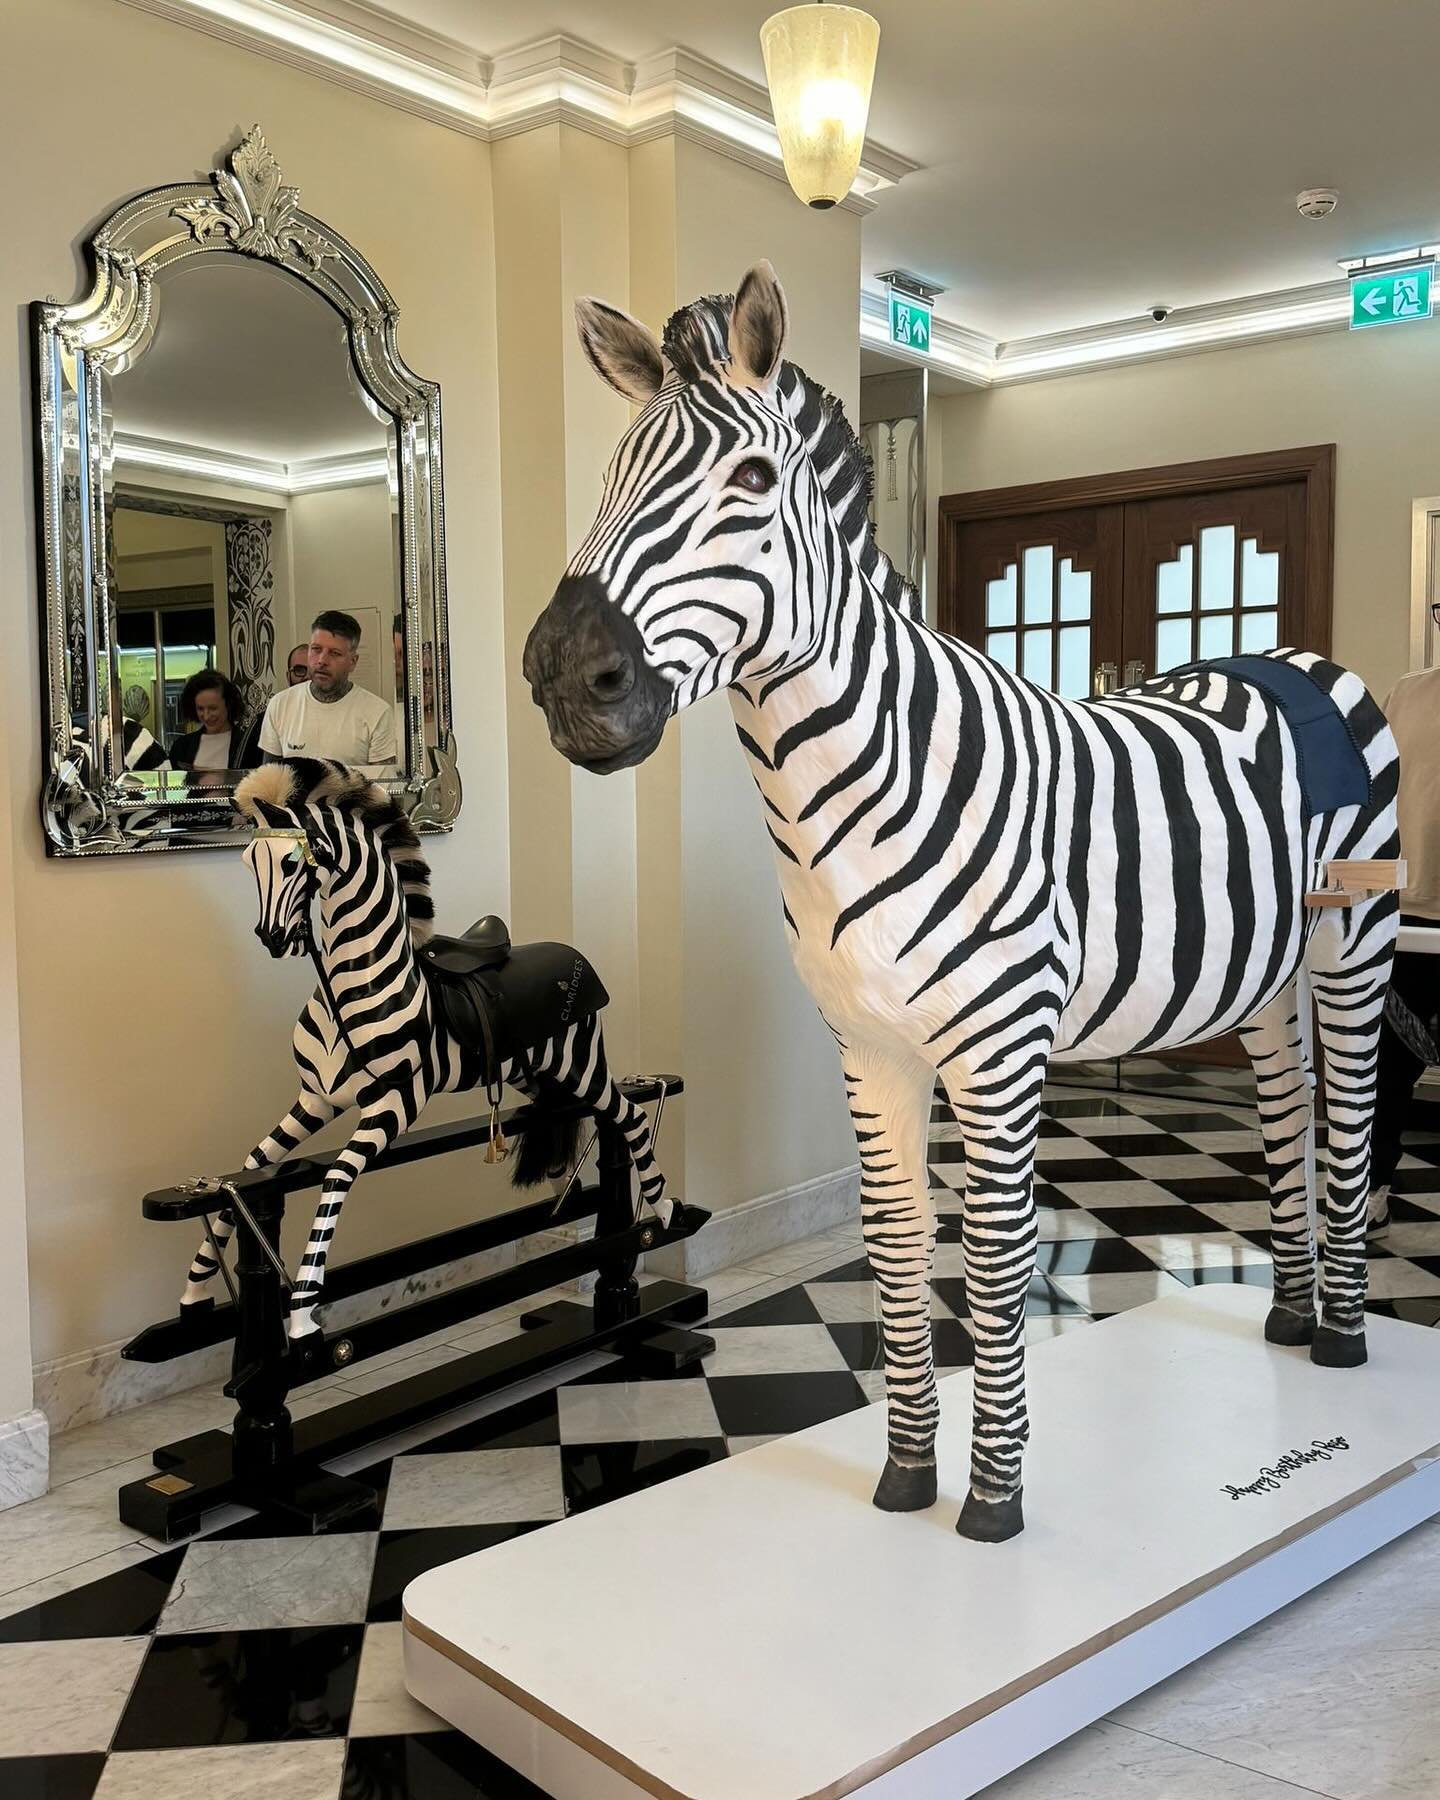 More pictures to come but I couldn&rsquo;t resist a share 🦓🦓🦓

This life size Zebra cake took the best part of two weeks to construct, sculpt and paint. It stood at 1.8m tall and many, many kilos in weight.

We added some saddle bags that held bot